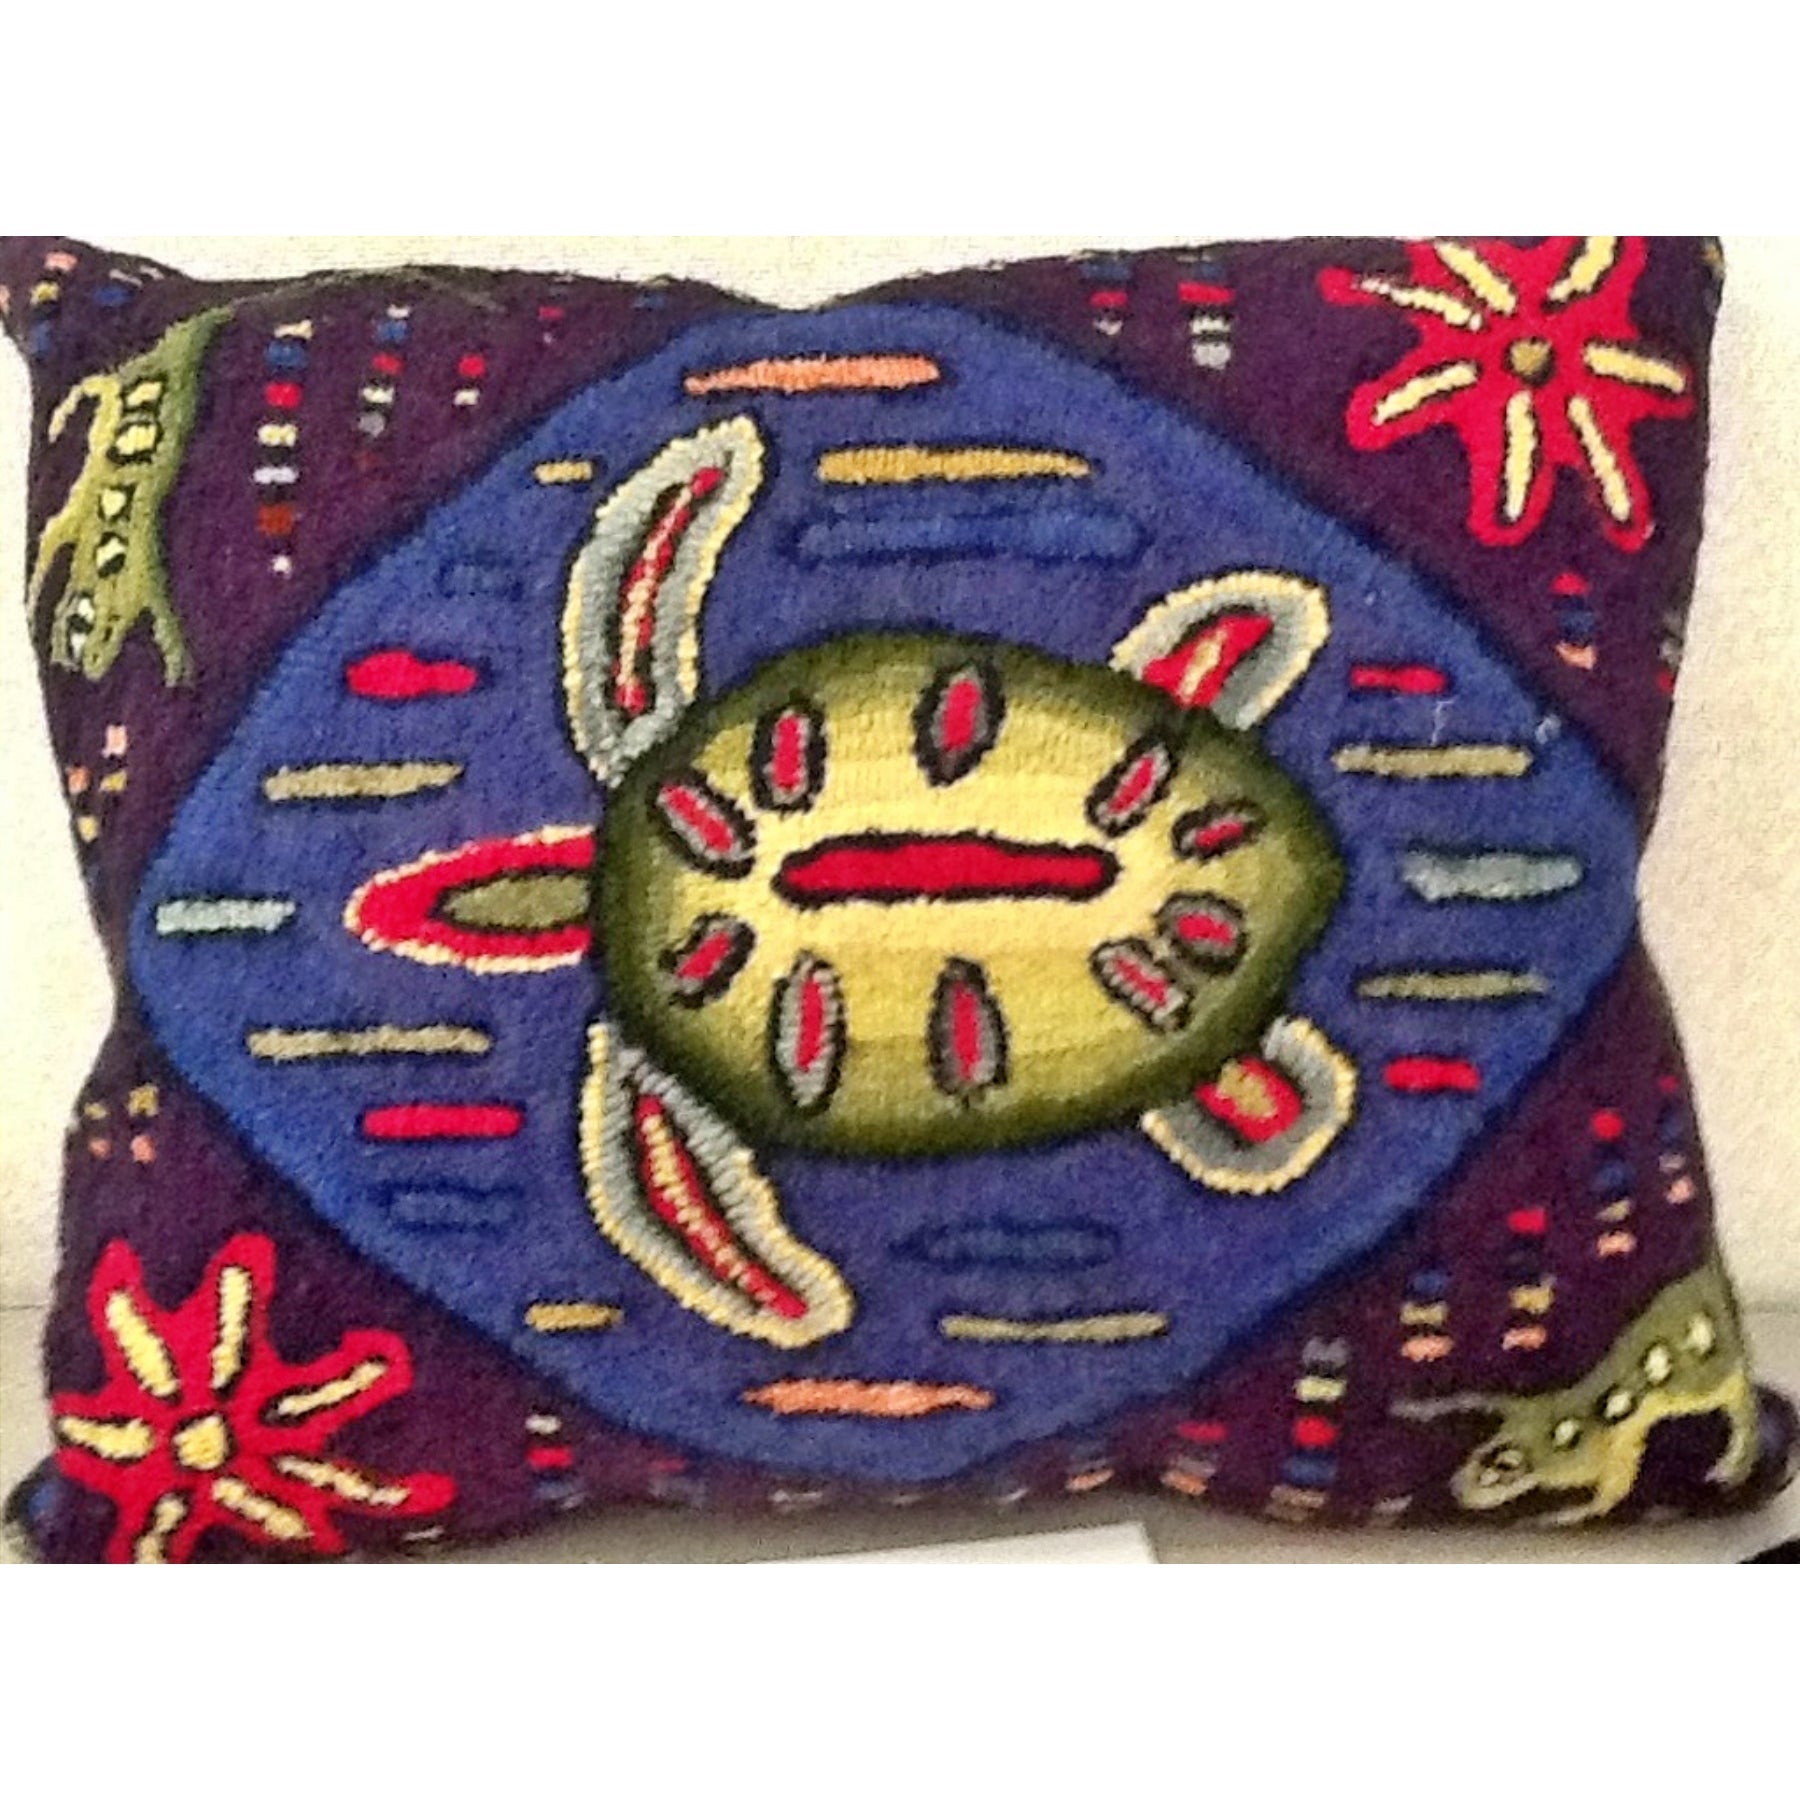 Tortuga, rug hooked by Dorothy Huse